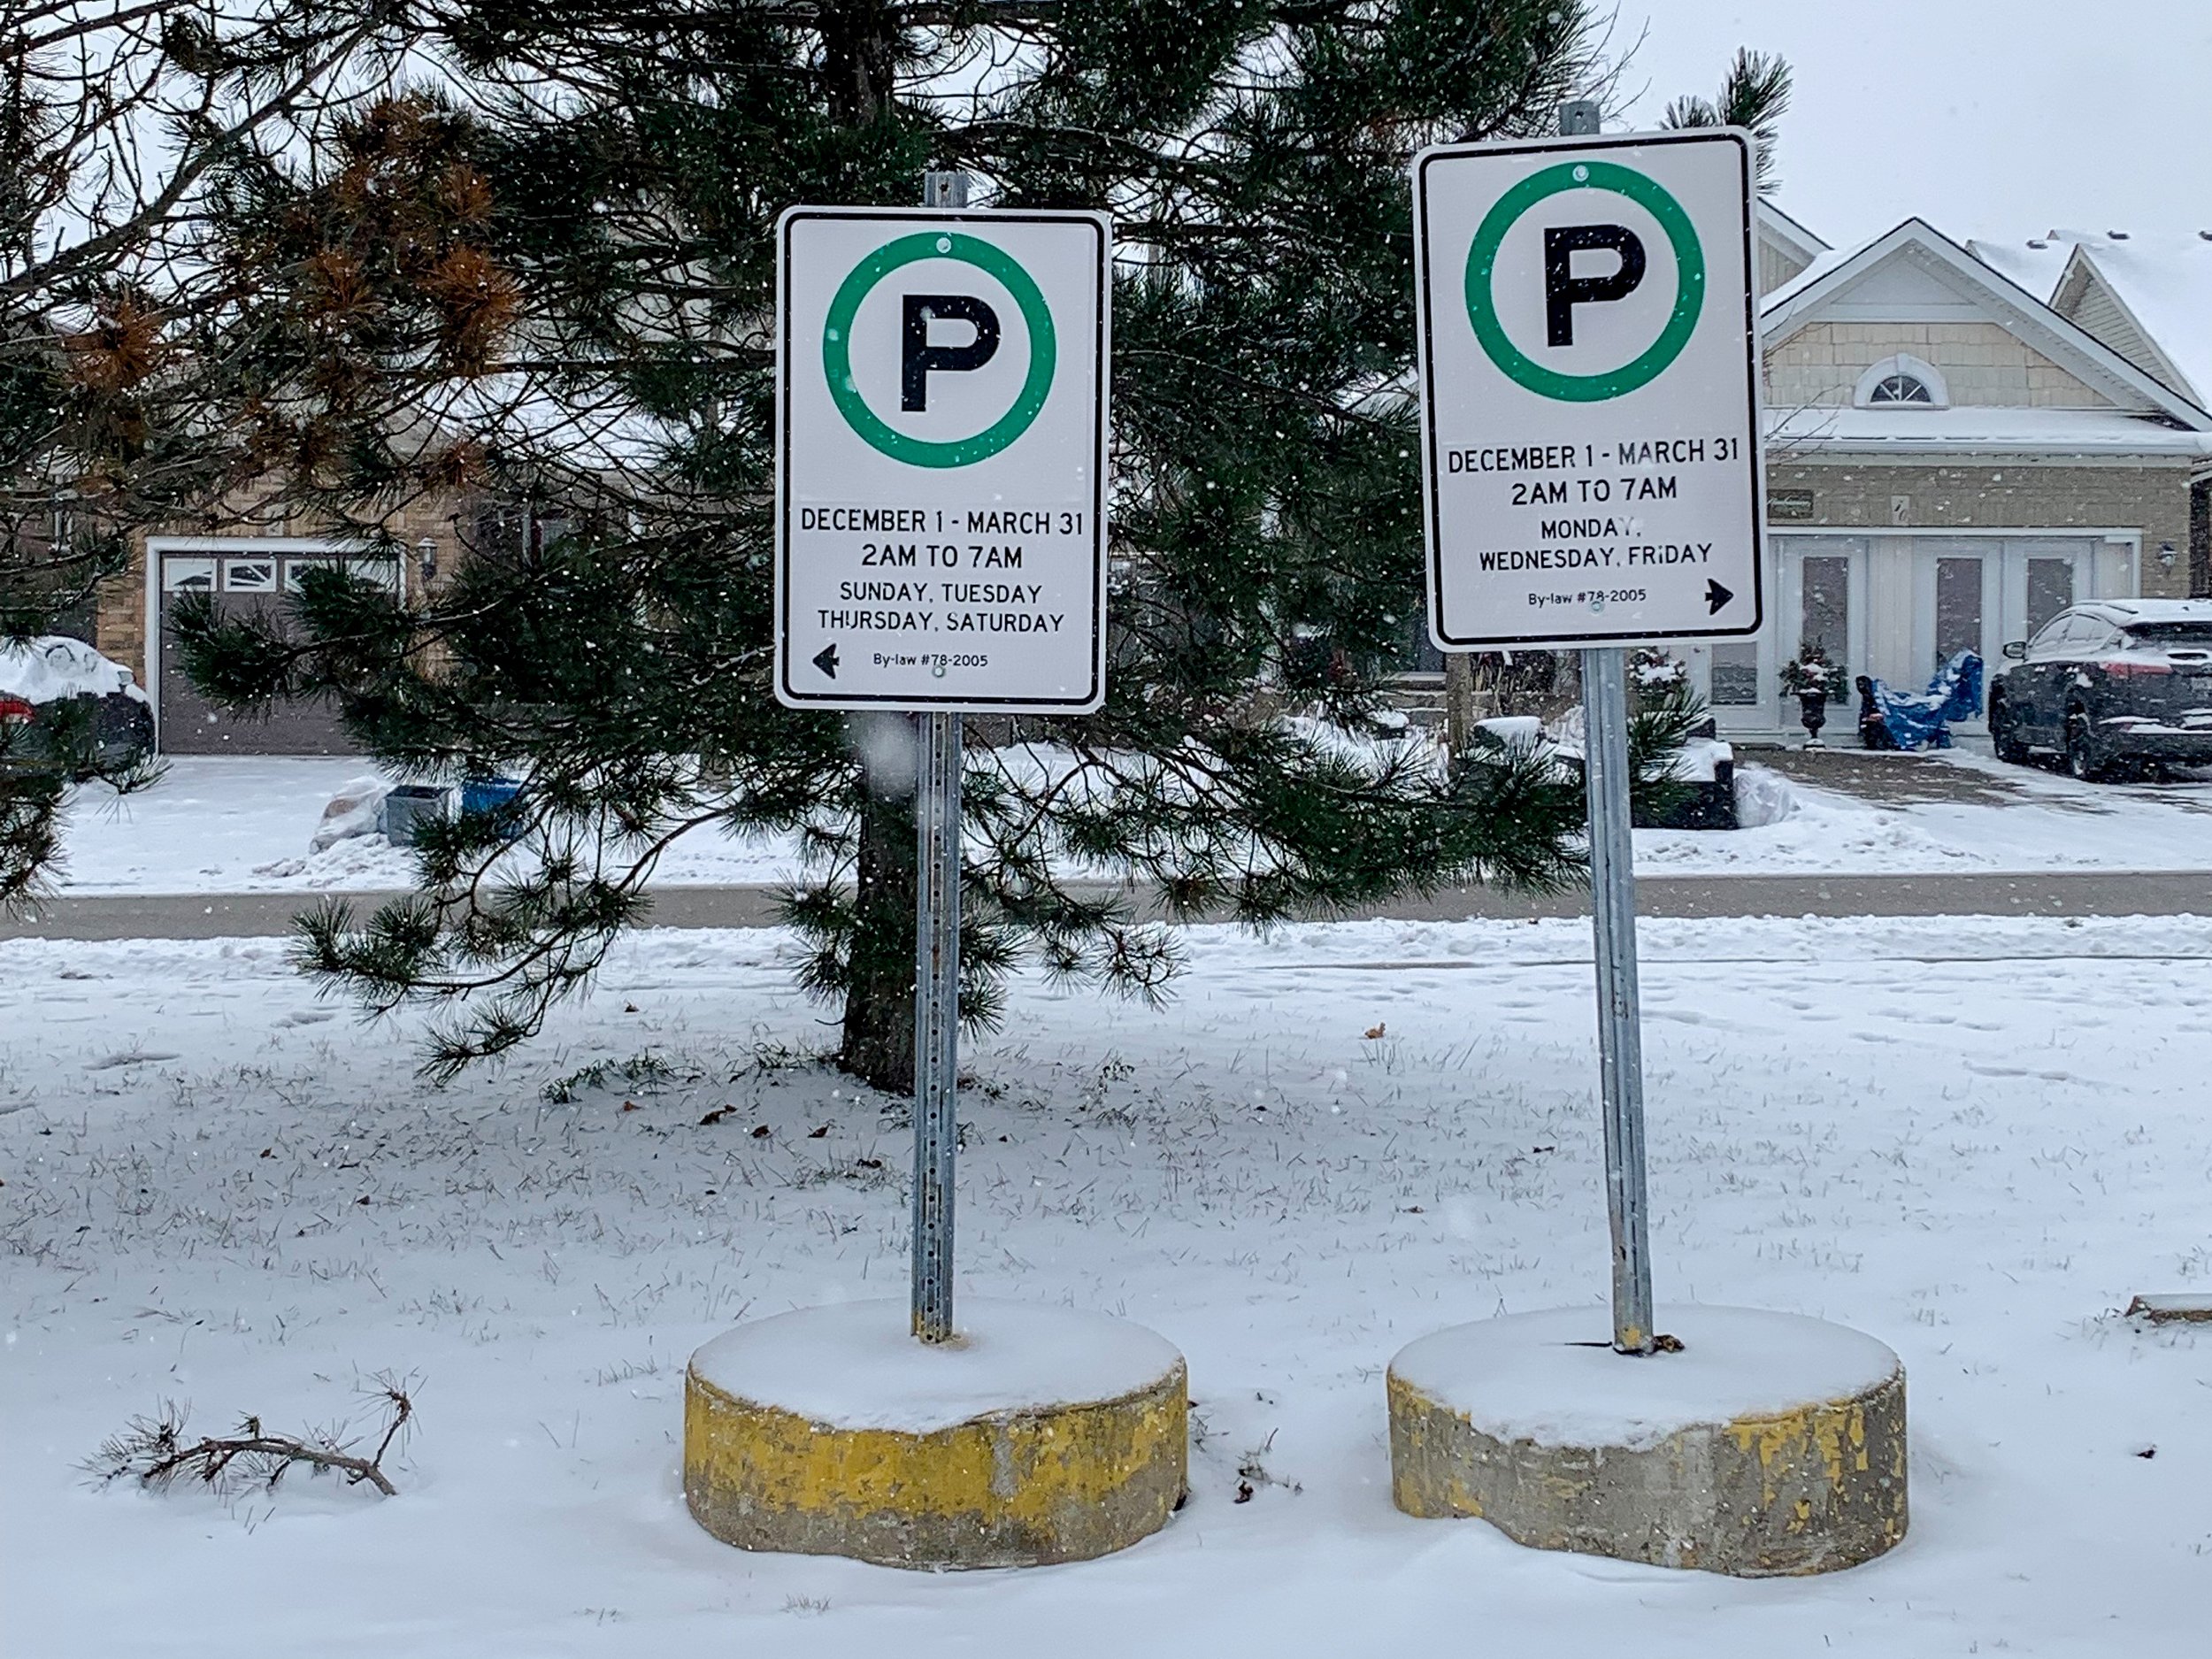 Two winter parking bylaw signs in a Town overnight parking lot.